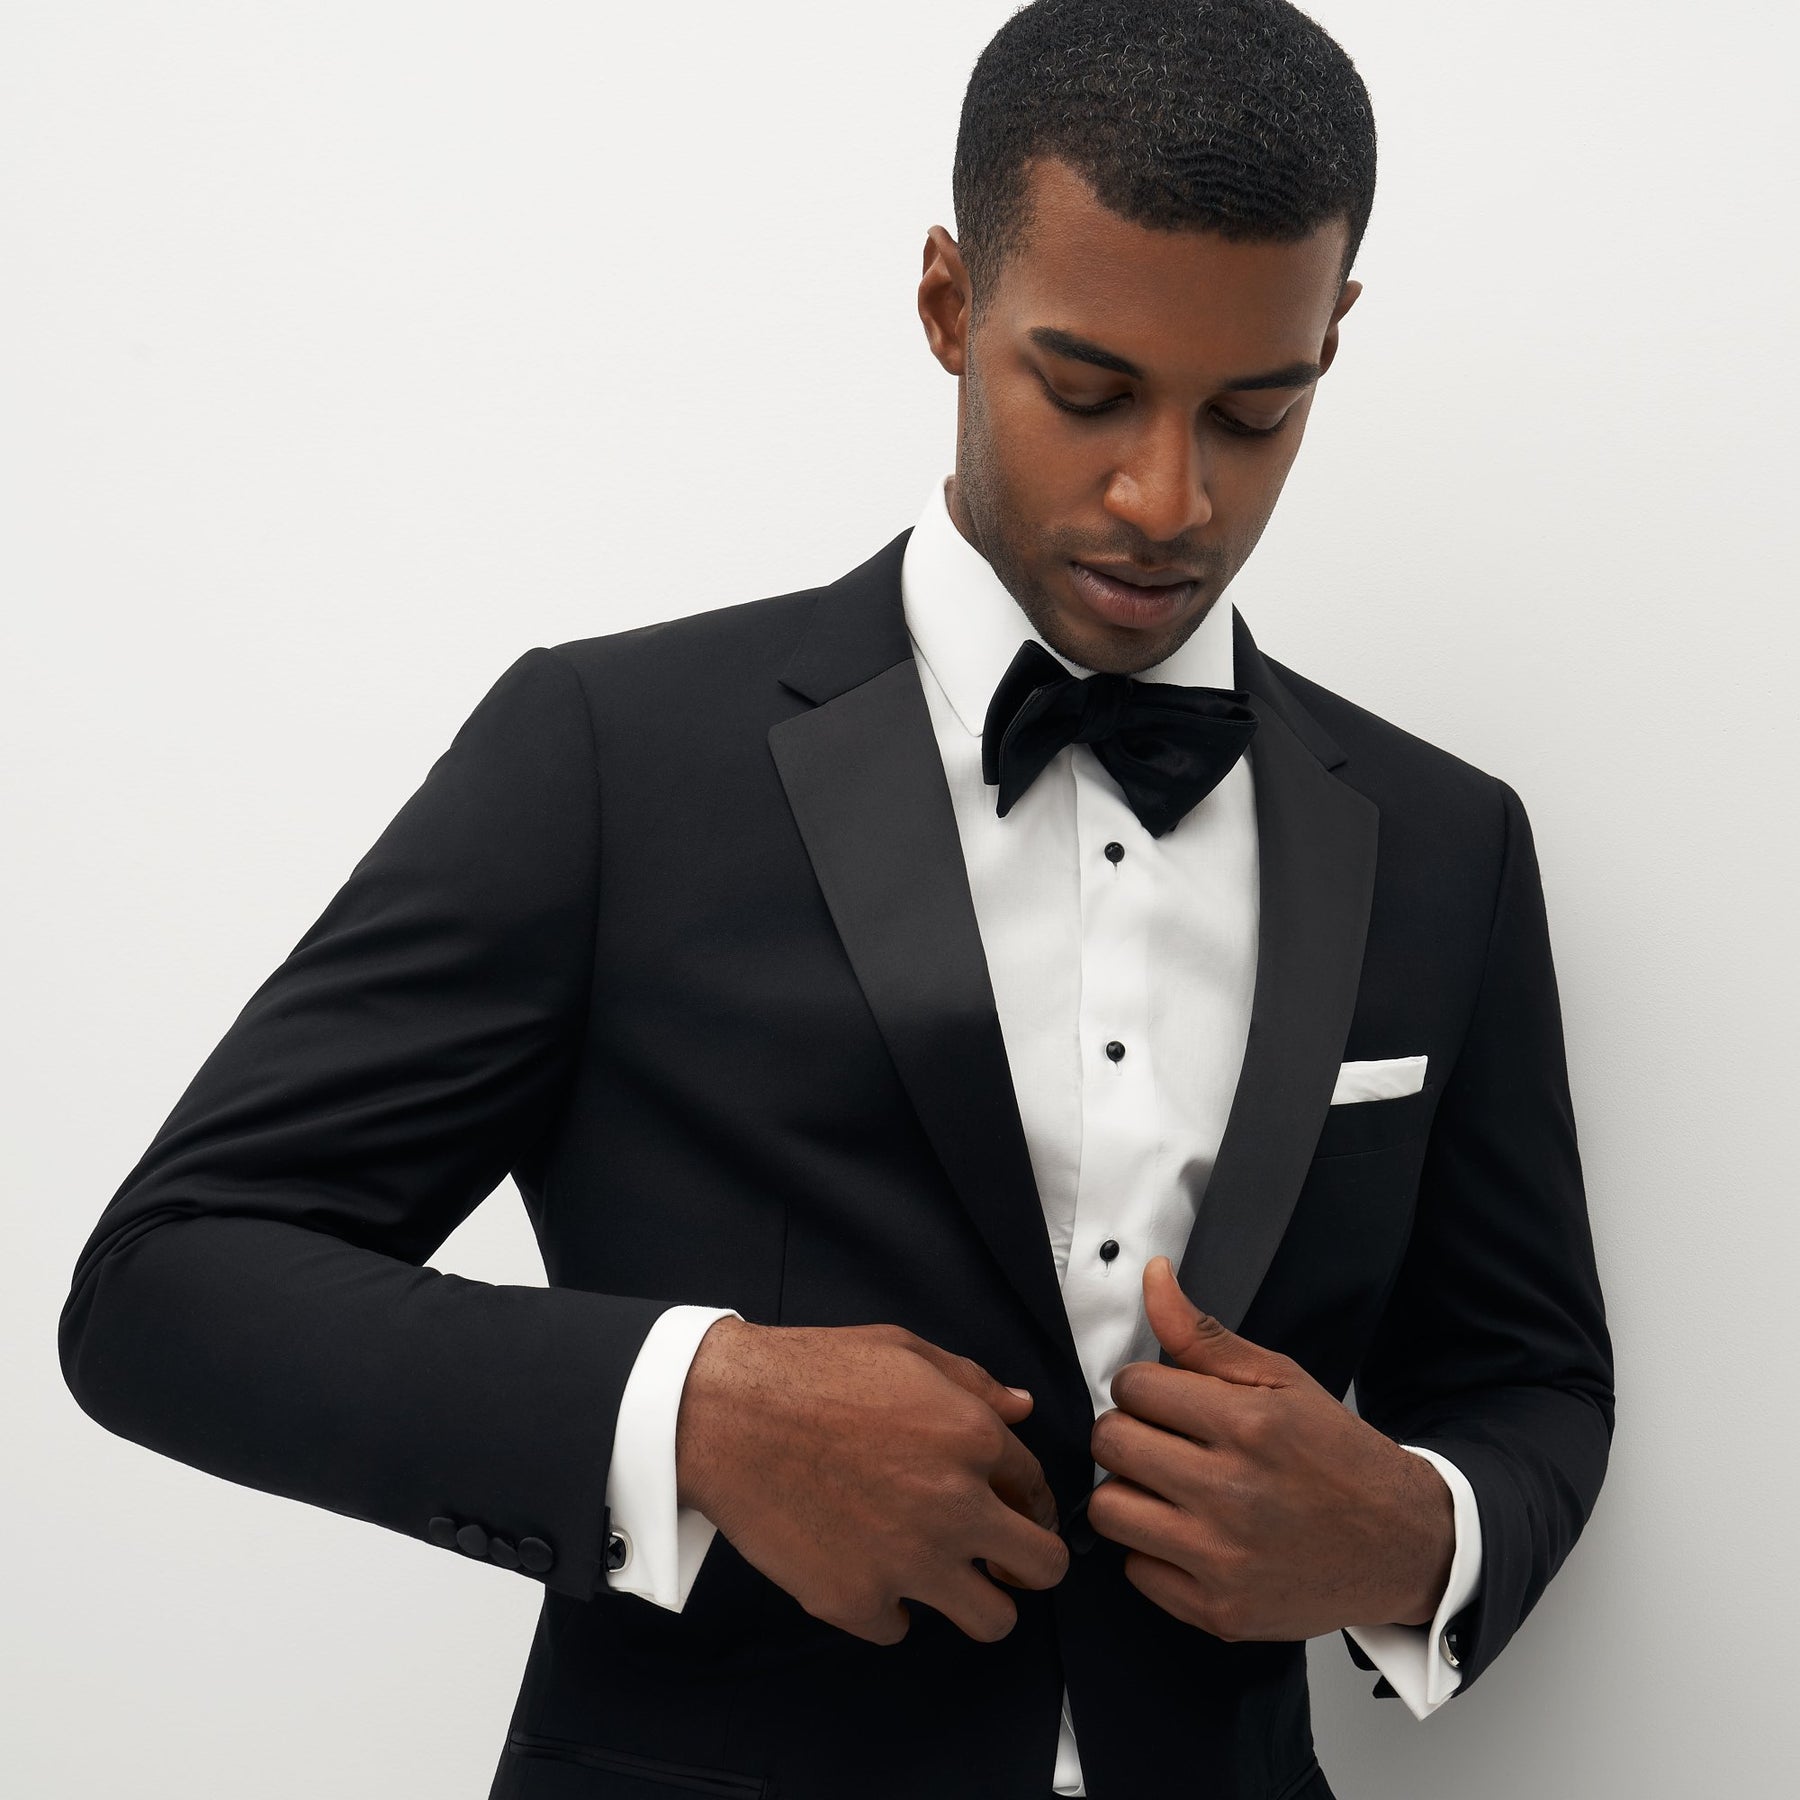 Black Tuxedo | Suits for Weddings & Events